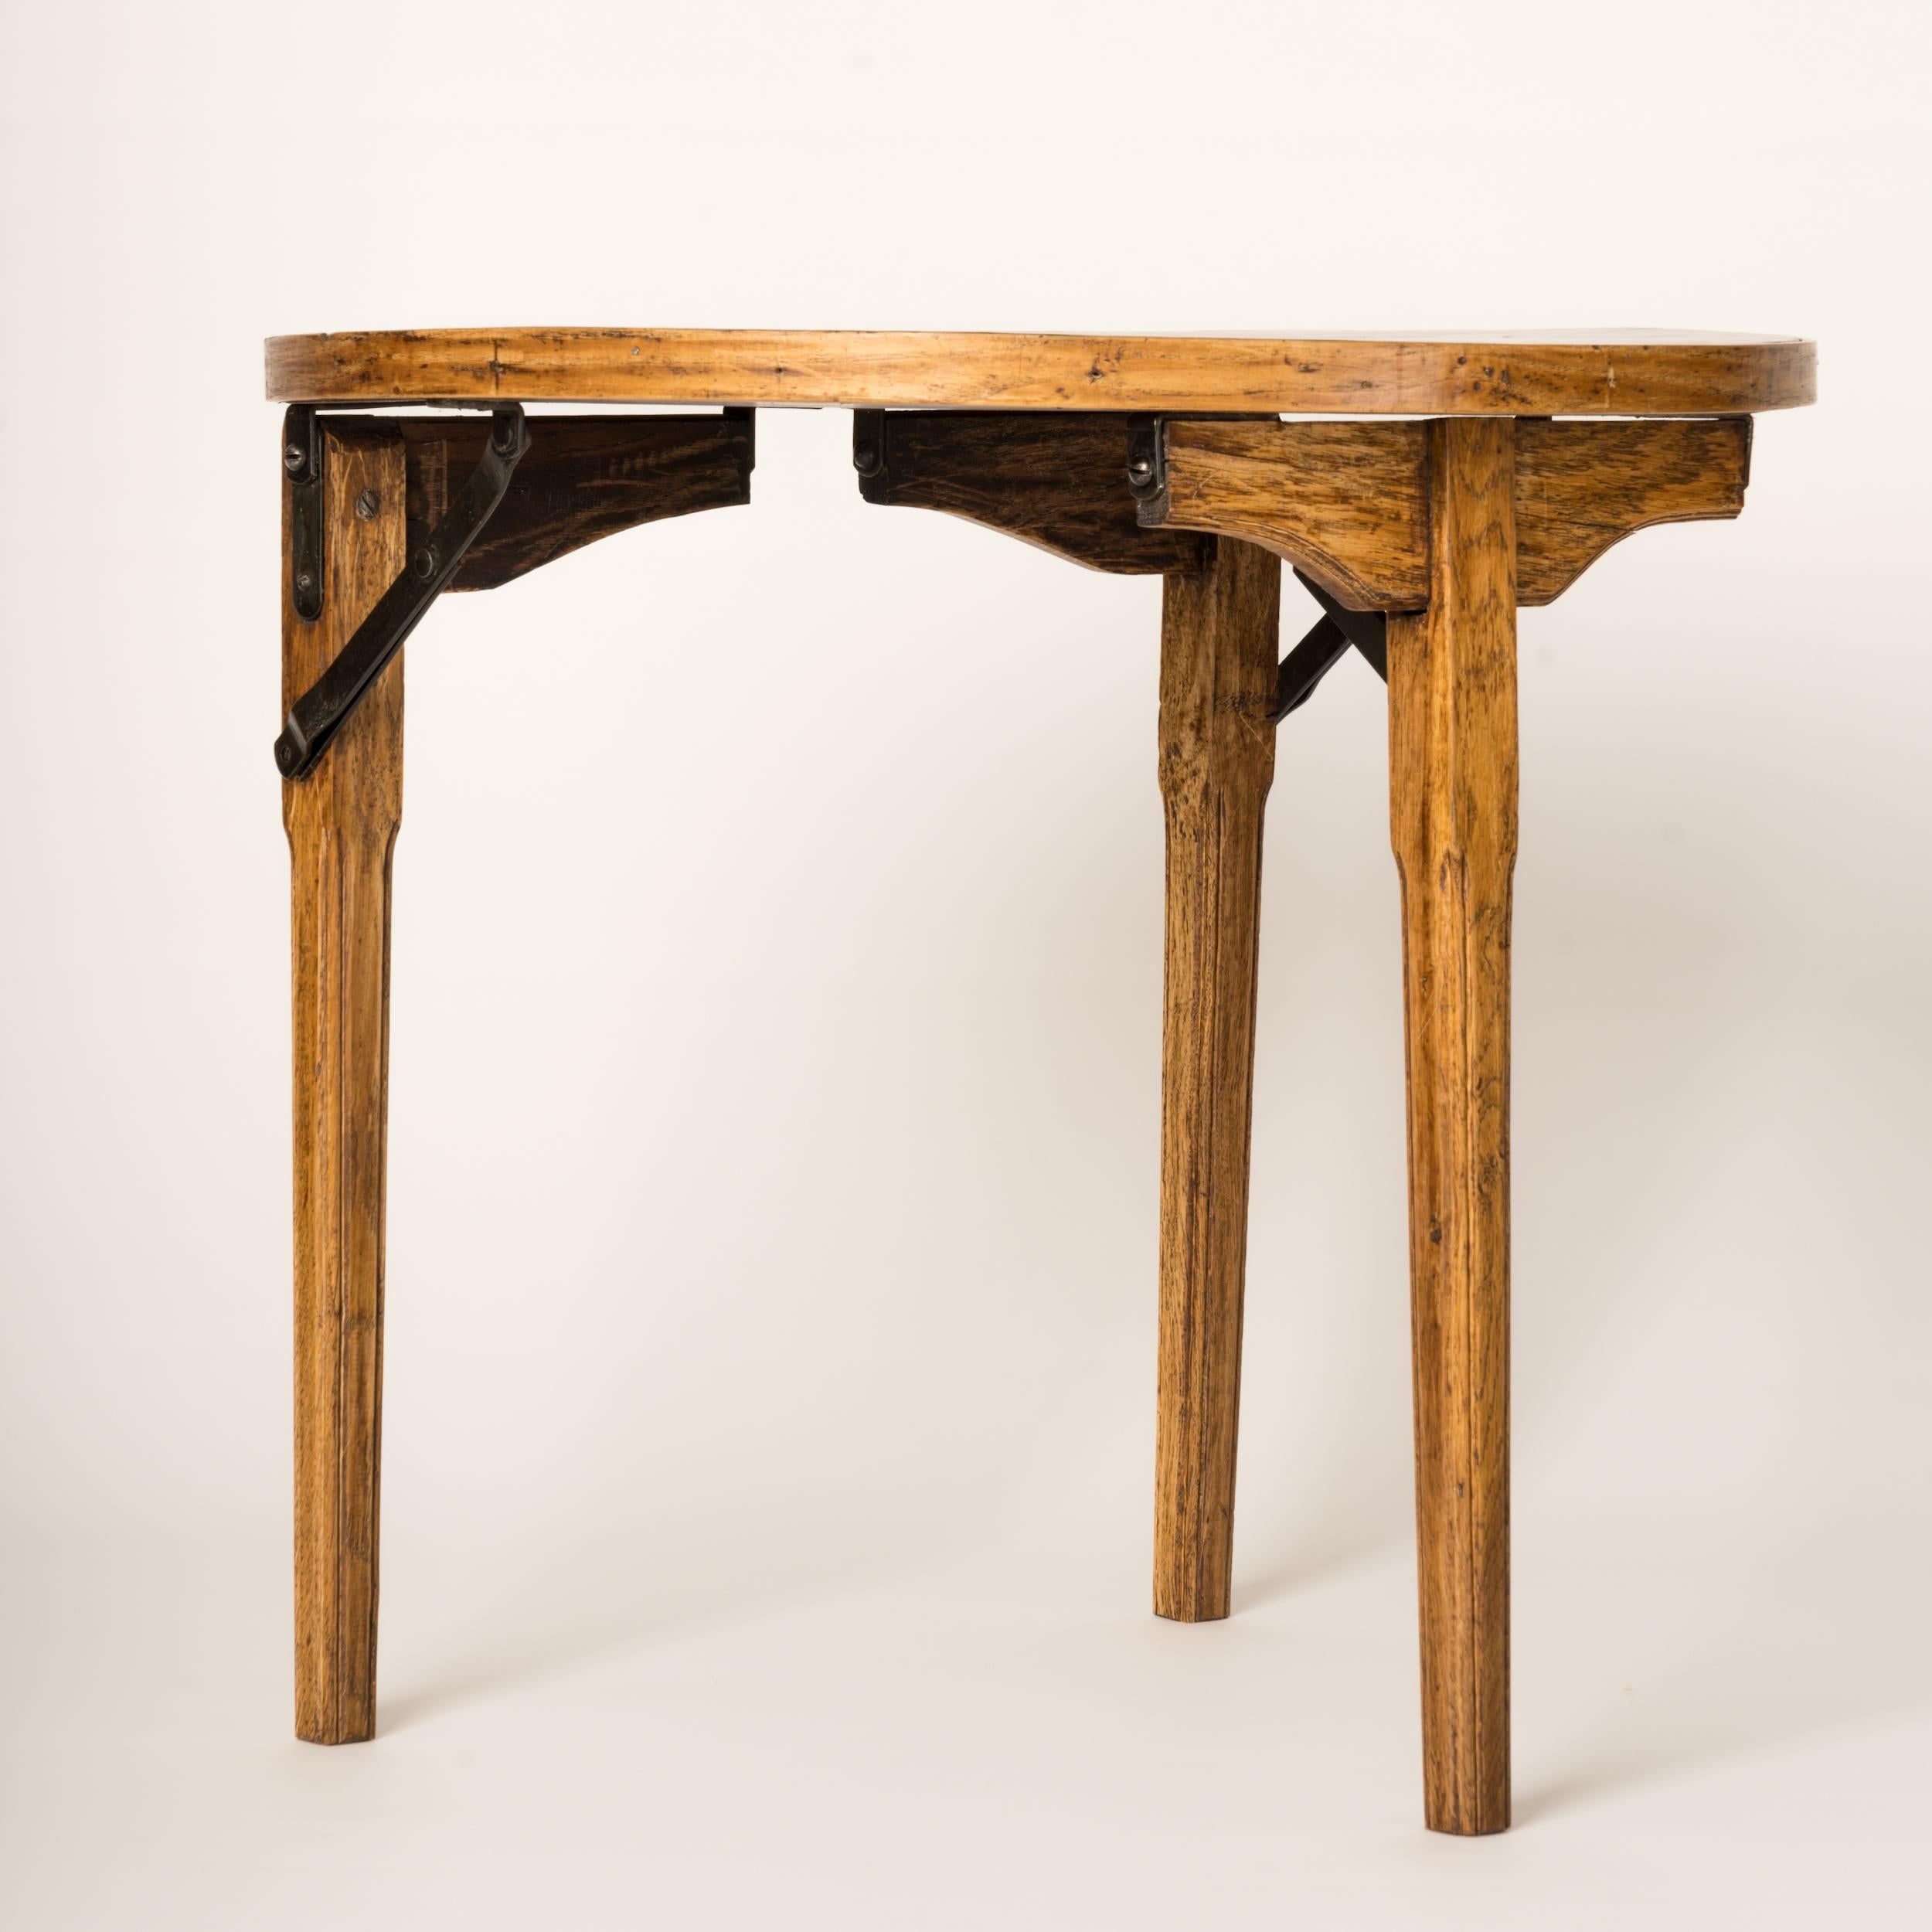 Mid-20th Century Foldable Feet Oak and Brown Leather End Table by E. Millien, France 1940's